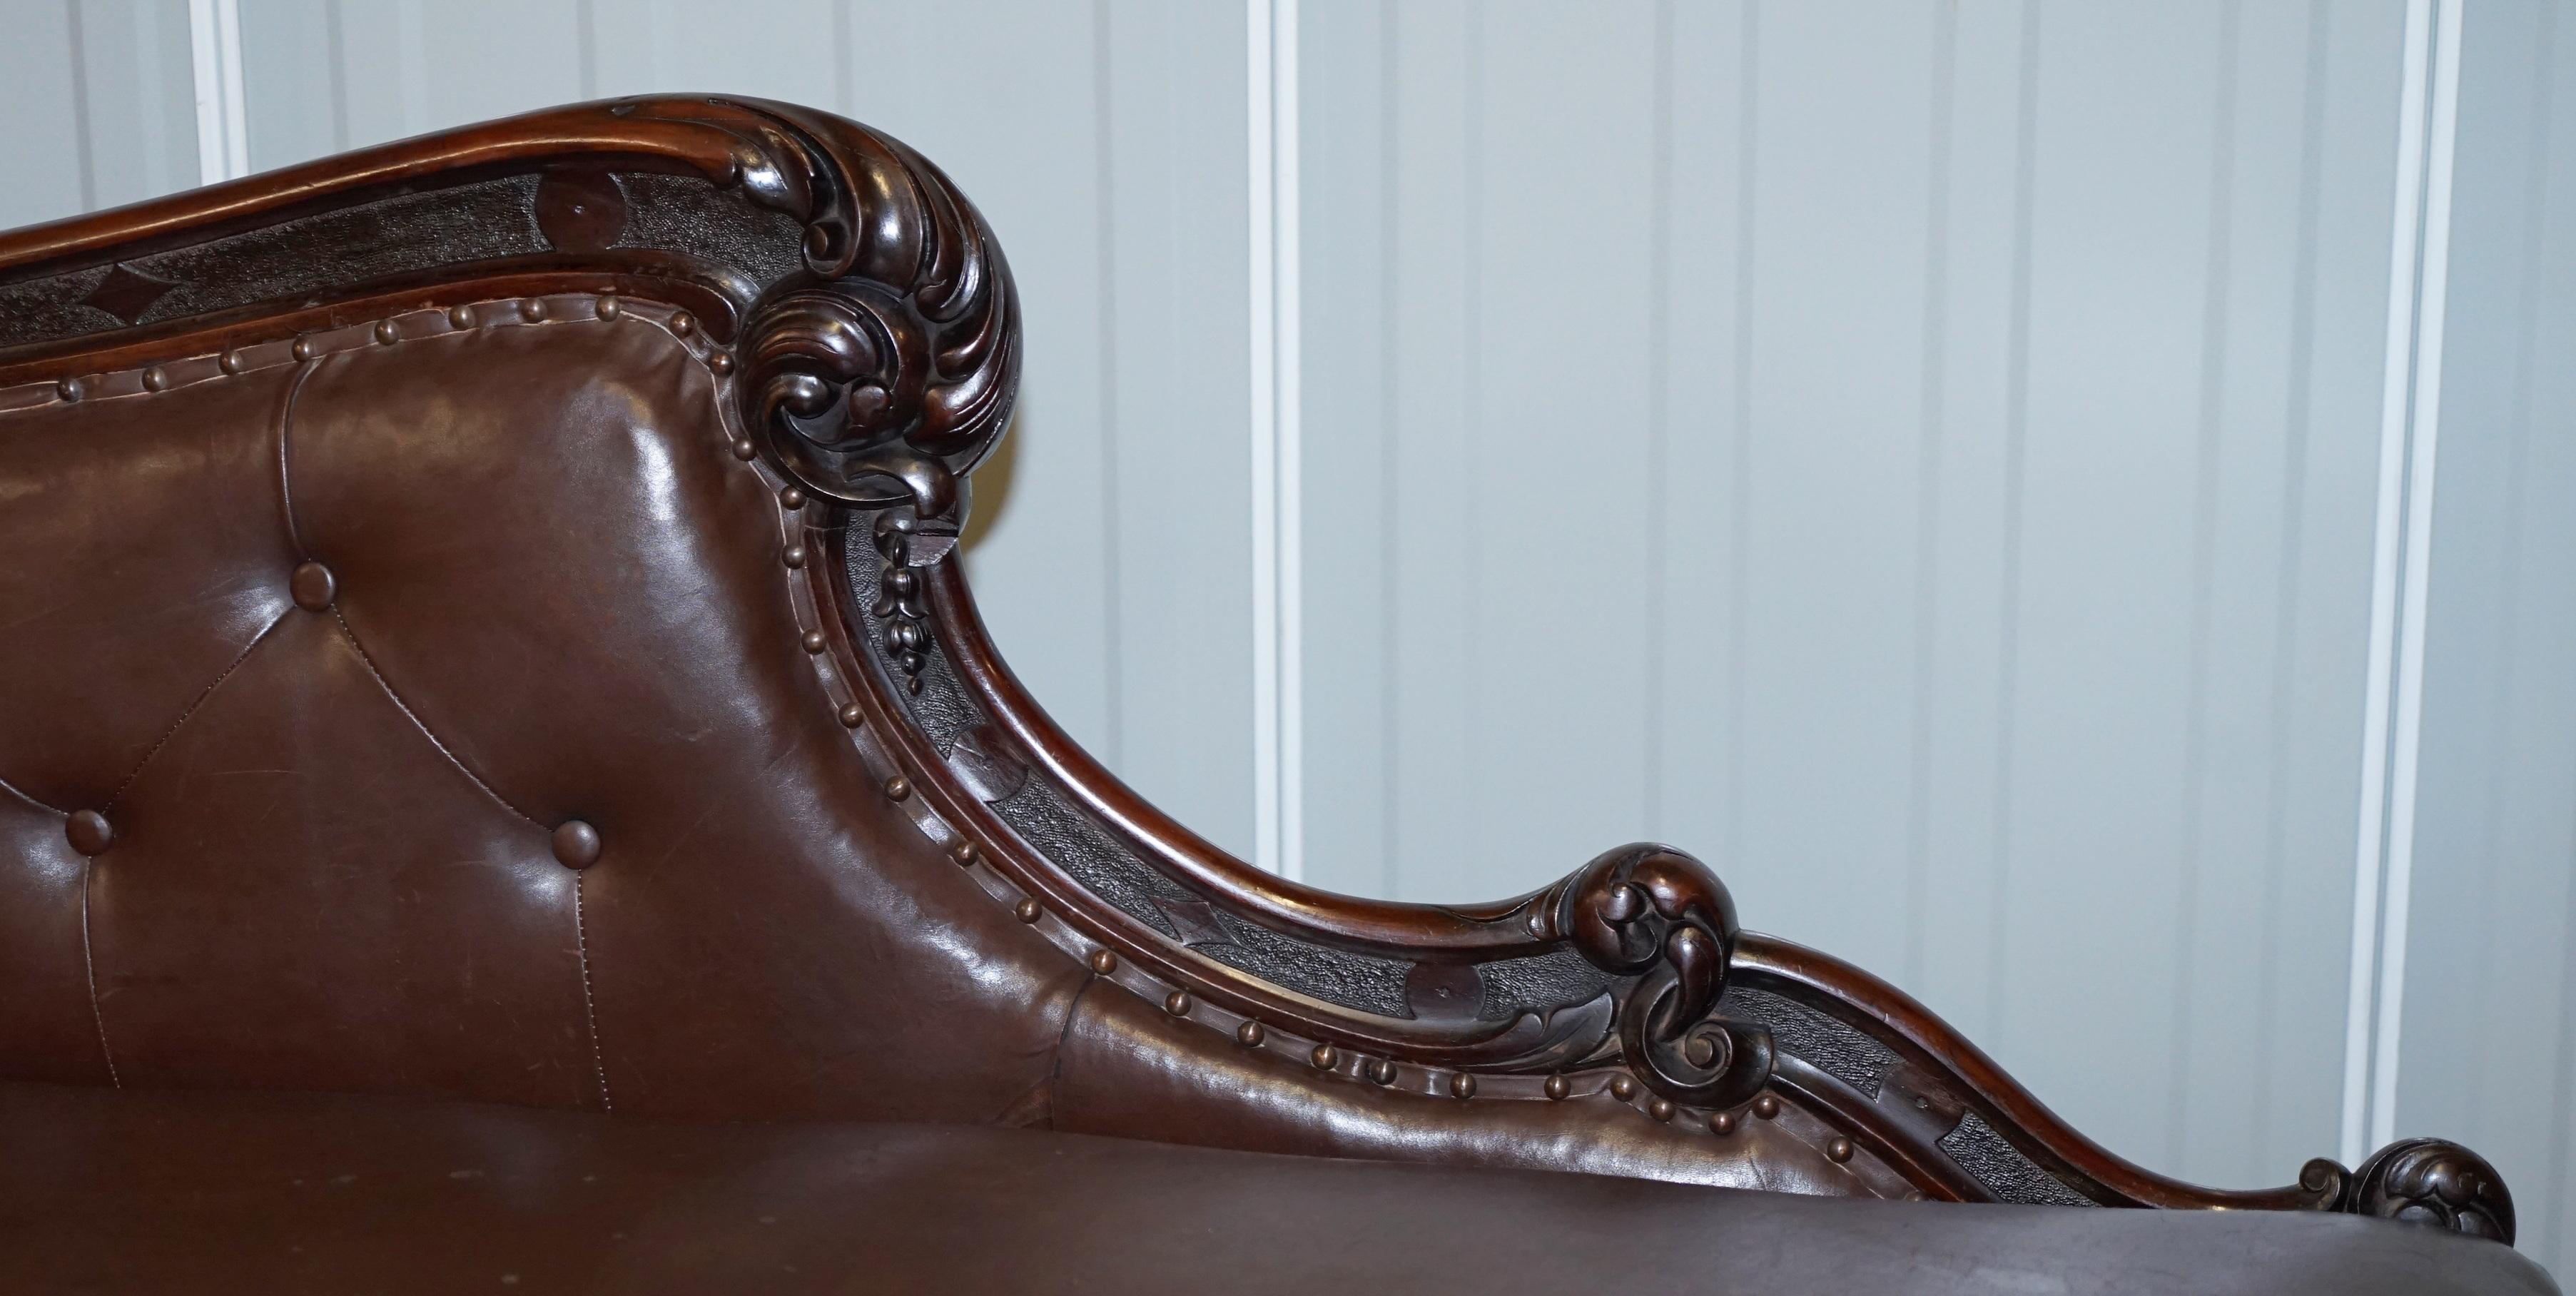 Early 19th Century Regency Mahogany & Brown Leather Chesterfield Buttoned Chaise Lounge Sofa Chair